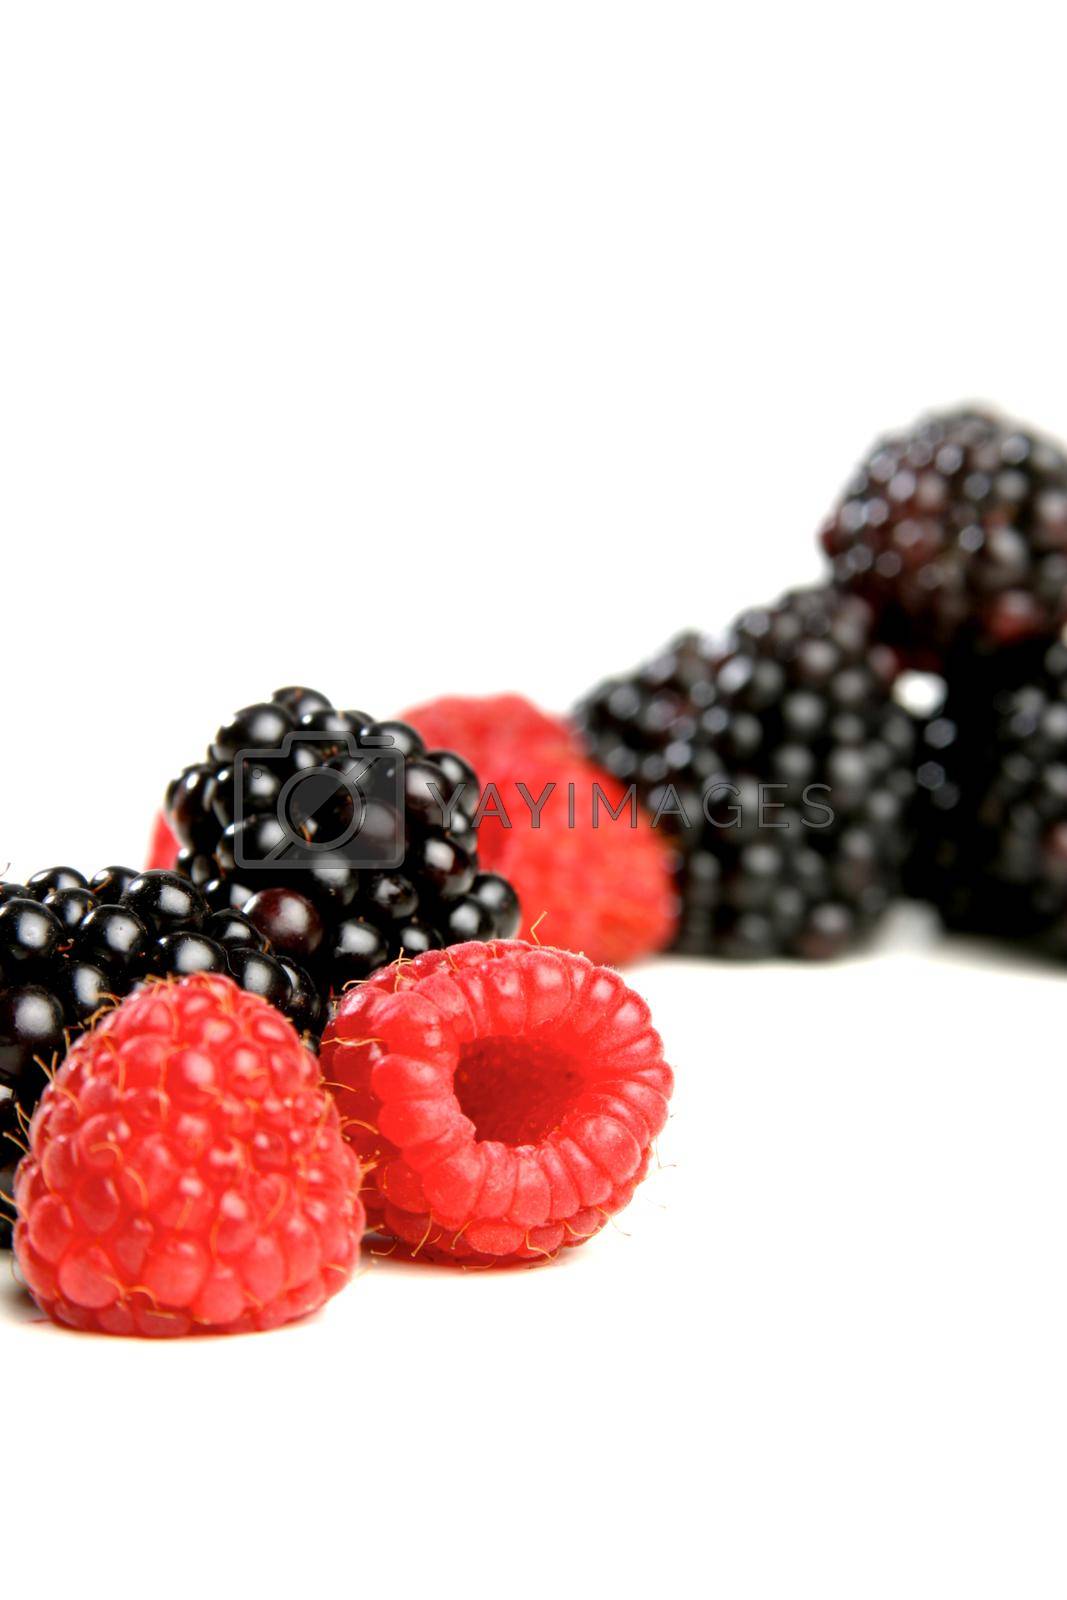 Royalty free image of Berries by moodboard